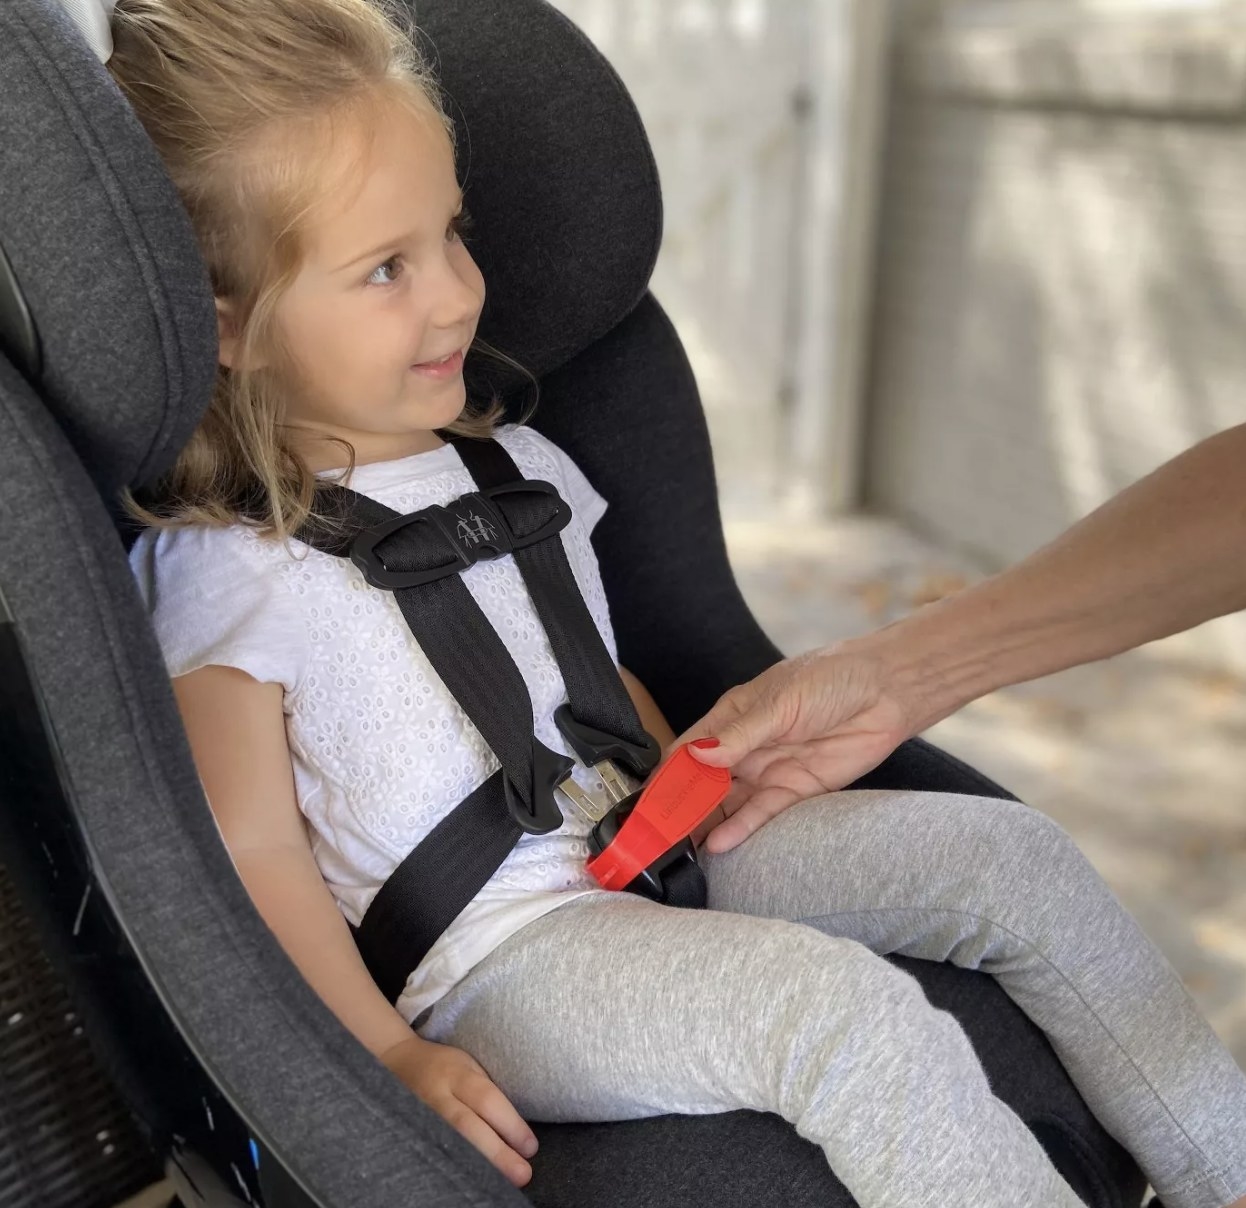 Kid in car seat and parent using seat buckle release tool